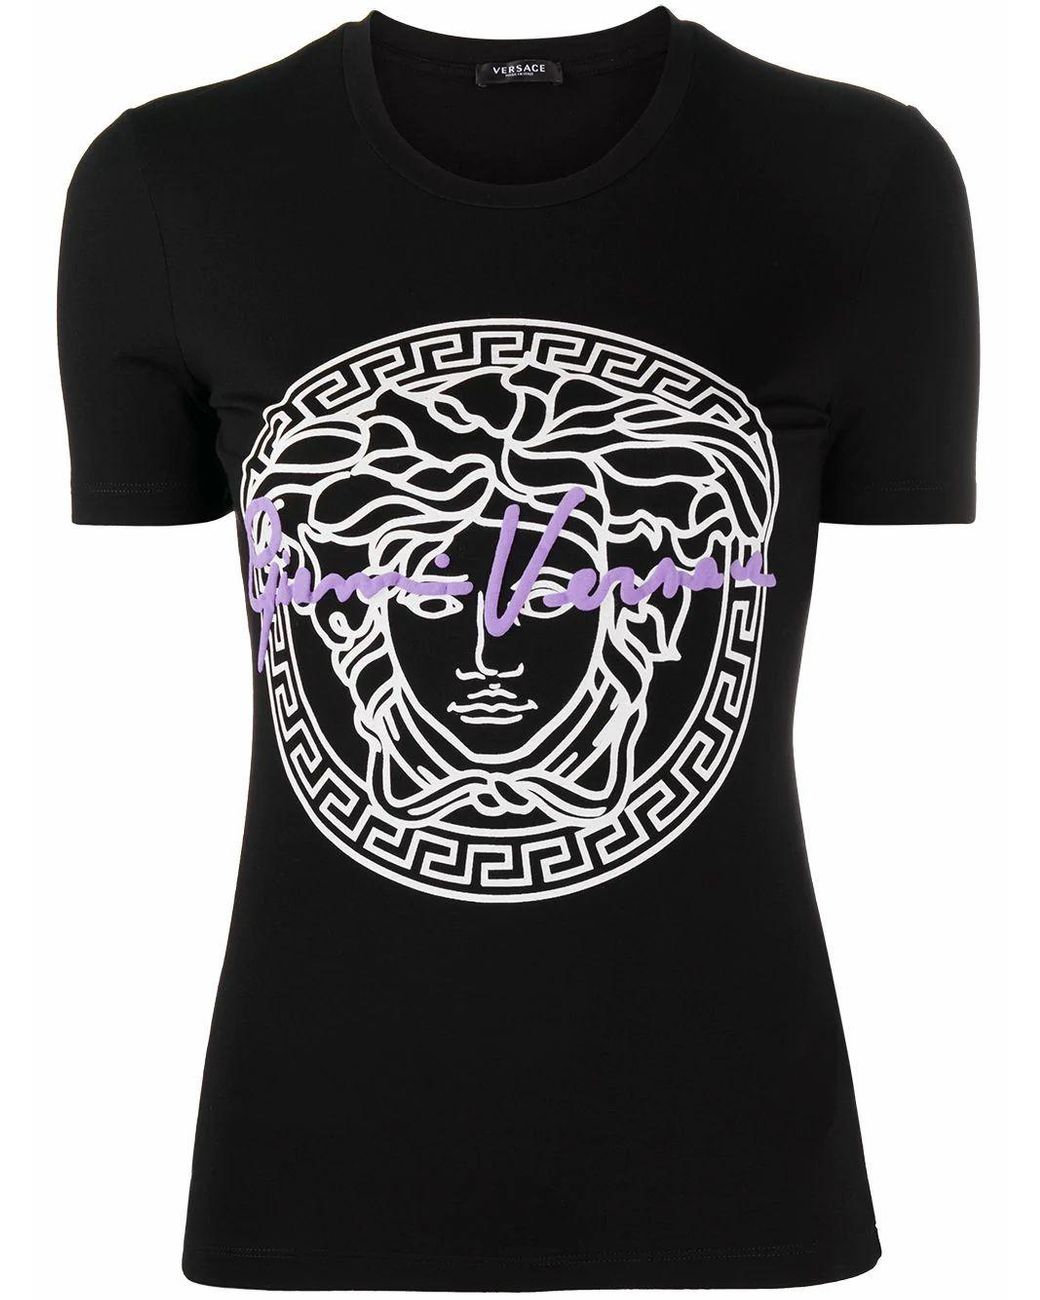 Versace Synthetic Viscose T-shirt in Black - Lyst